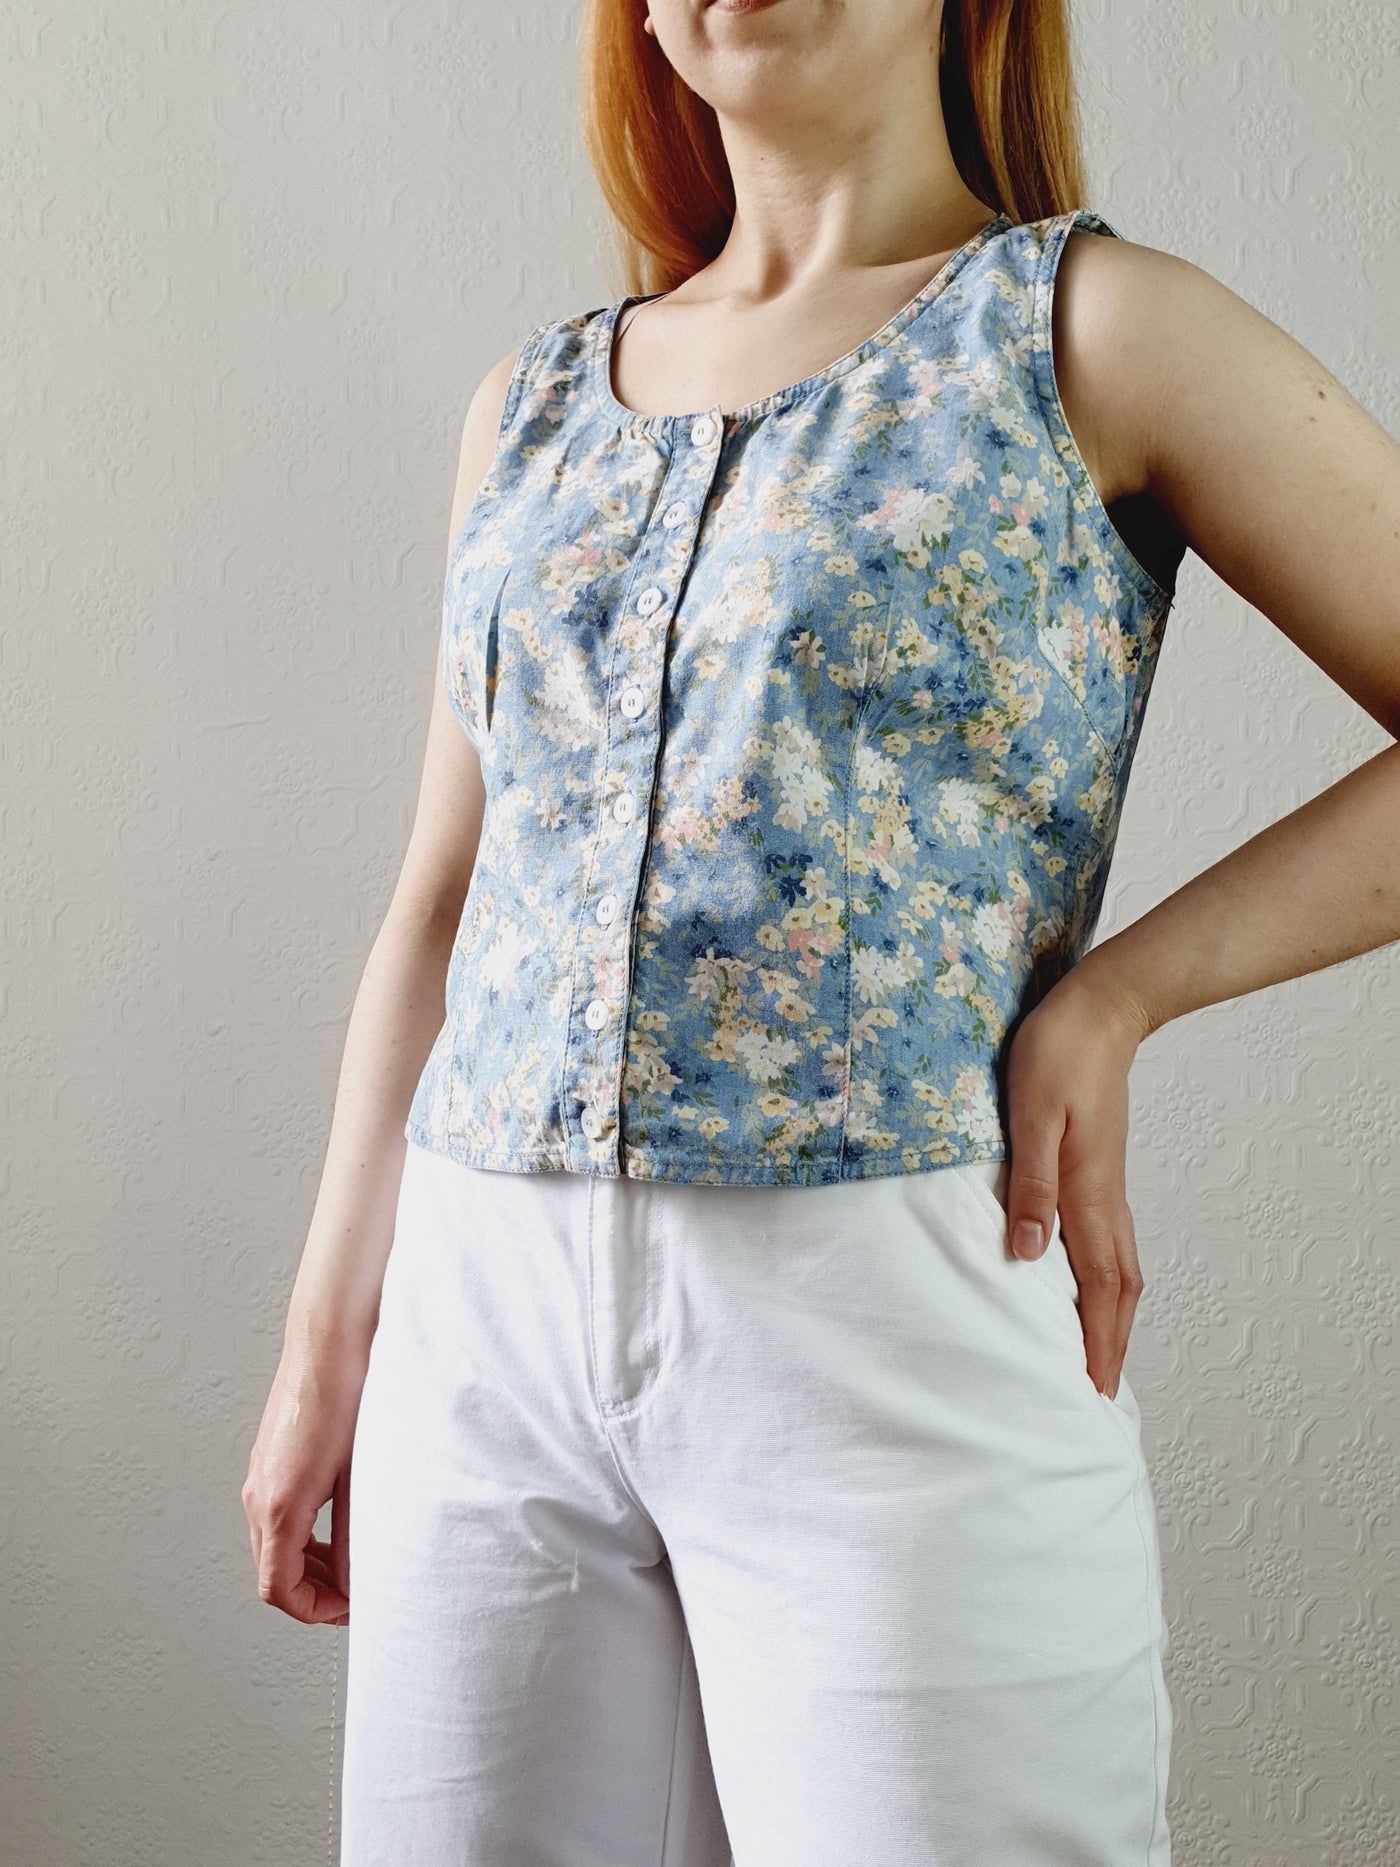 Vintage Floral Sleeveless Top • S-M